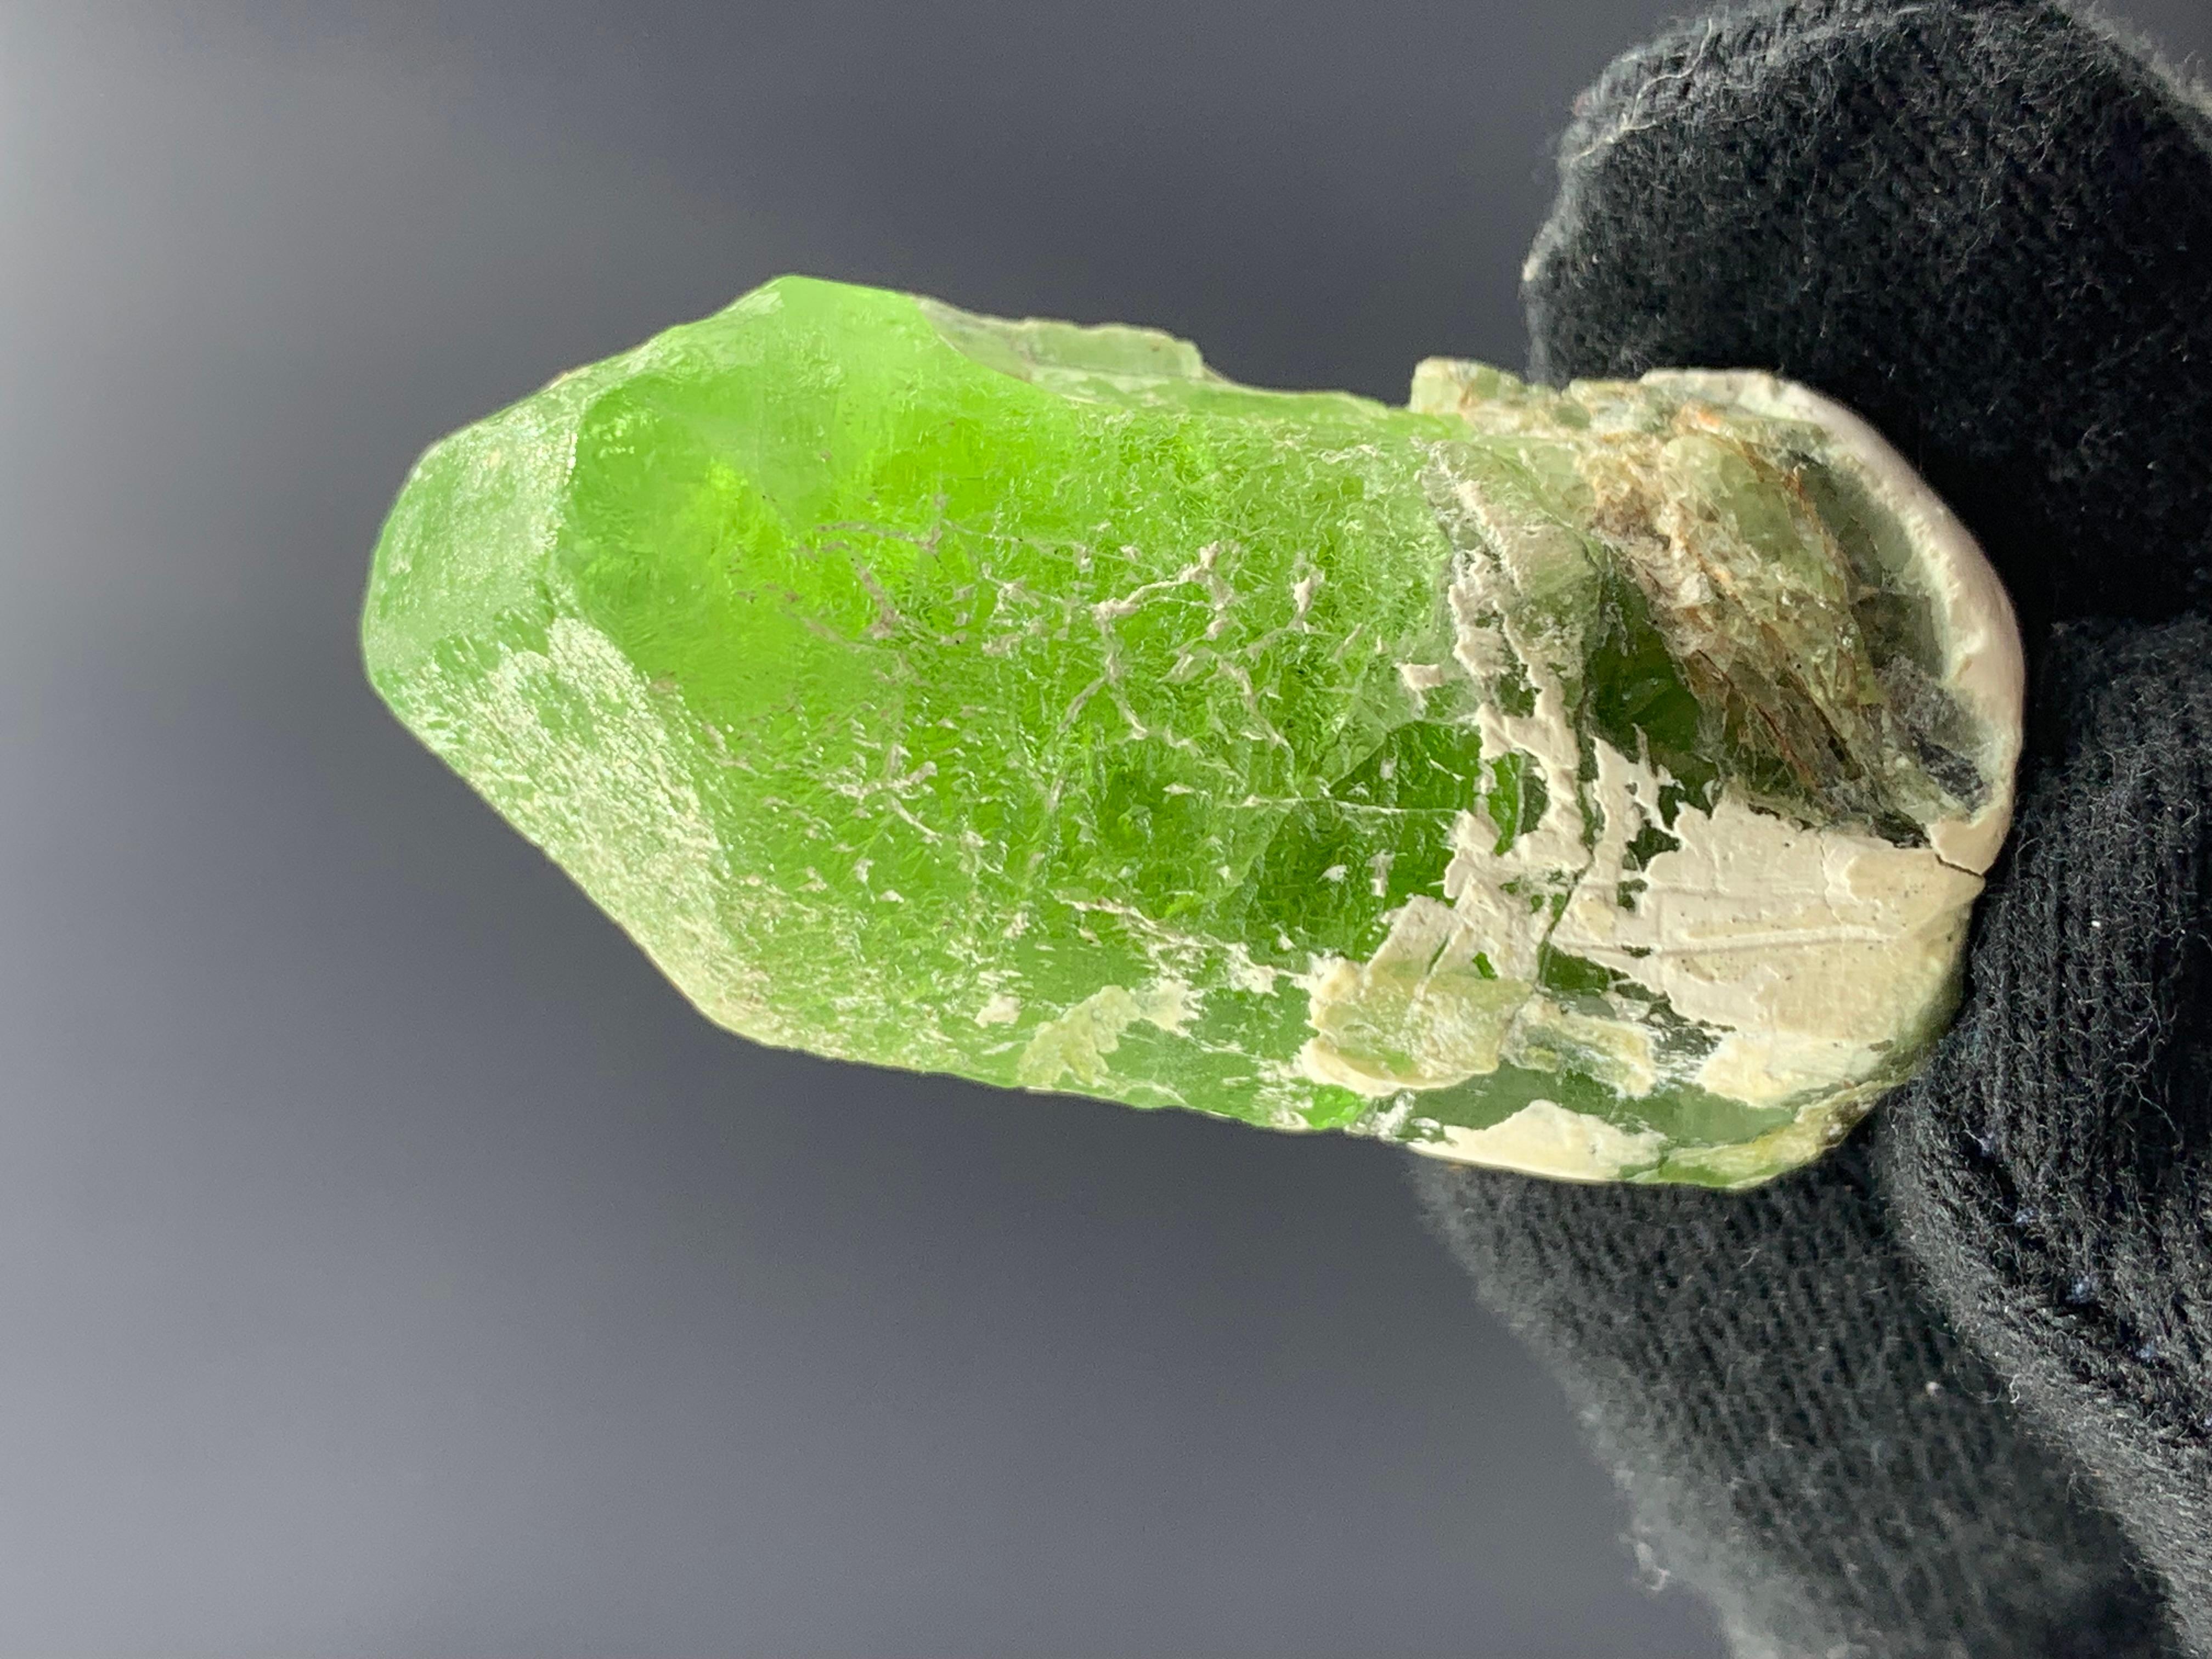 35.03 Gram Apple Green Peridot Specimen From Supat Valley, Pakistan 

Weight: 35.03 Gram 
Dimension: 4.4 x 2.1 x 2 Cm 
Origin: Supat Valley, Mansehra District, Pakistan 

Peridot is a popular stone for protection against difficulties and negativity.